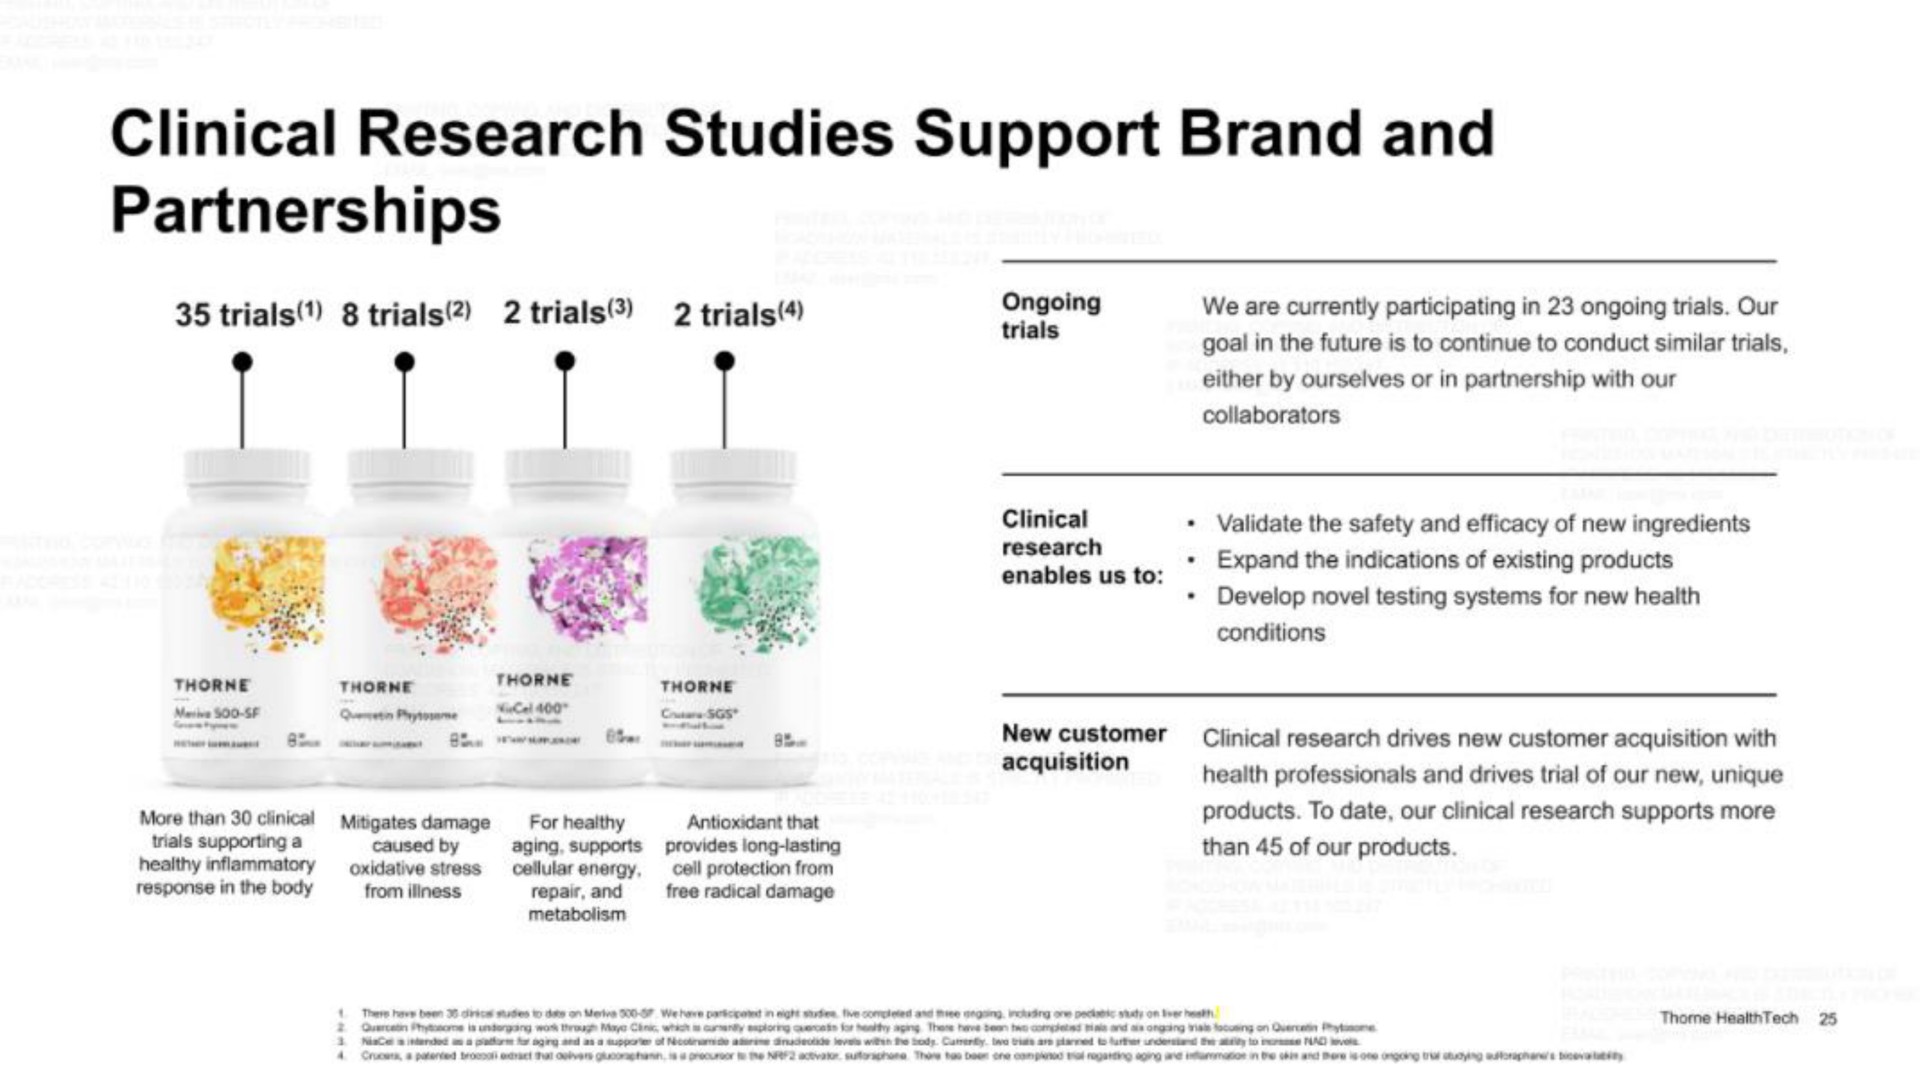 clinical research studies support brand and partnerships | Thorne HealthTech